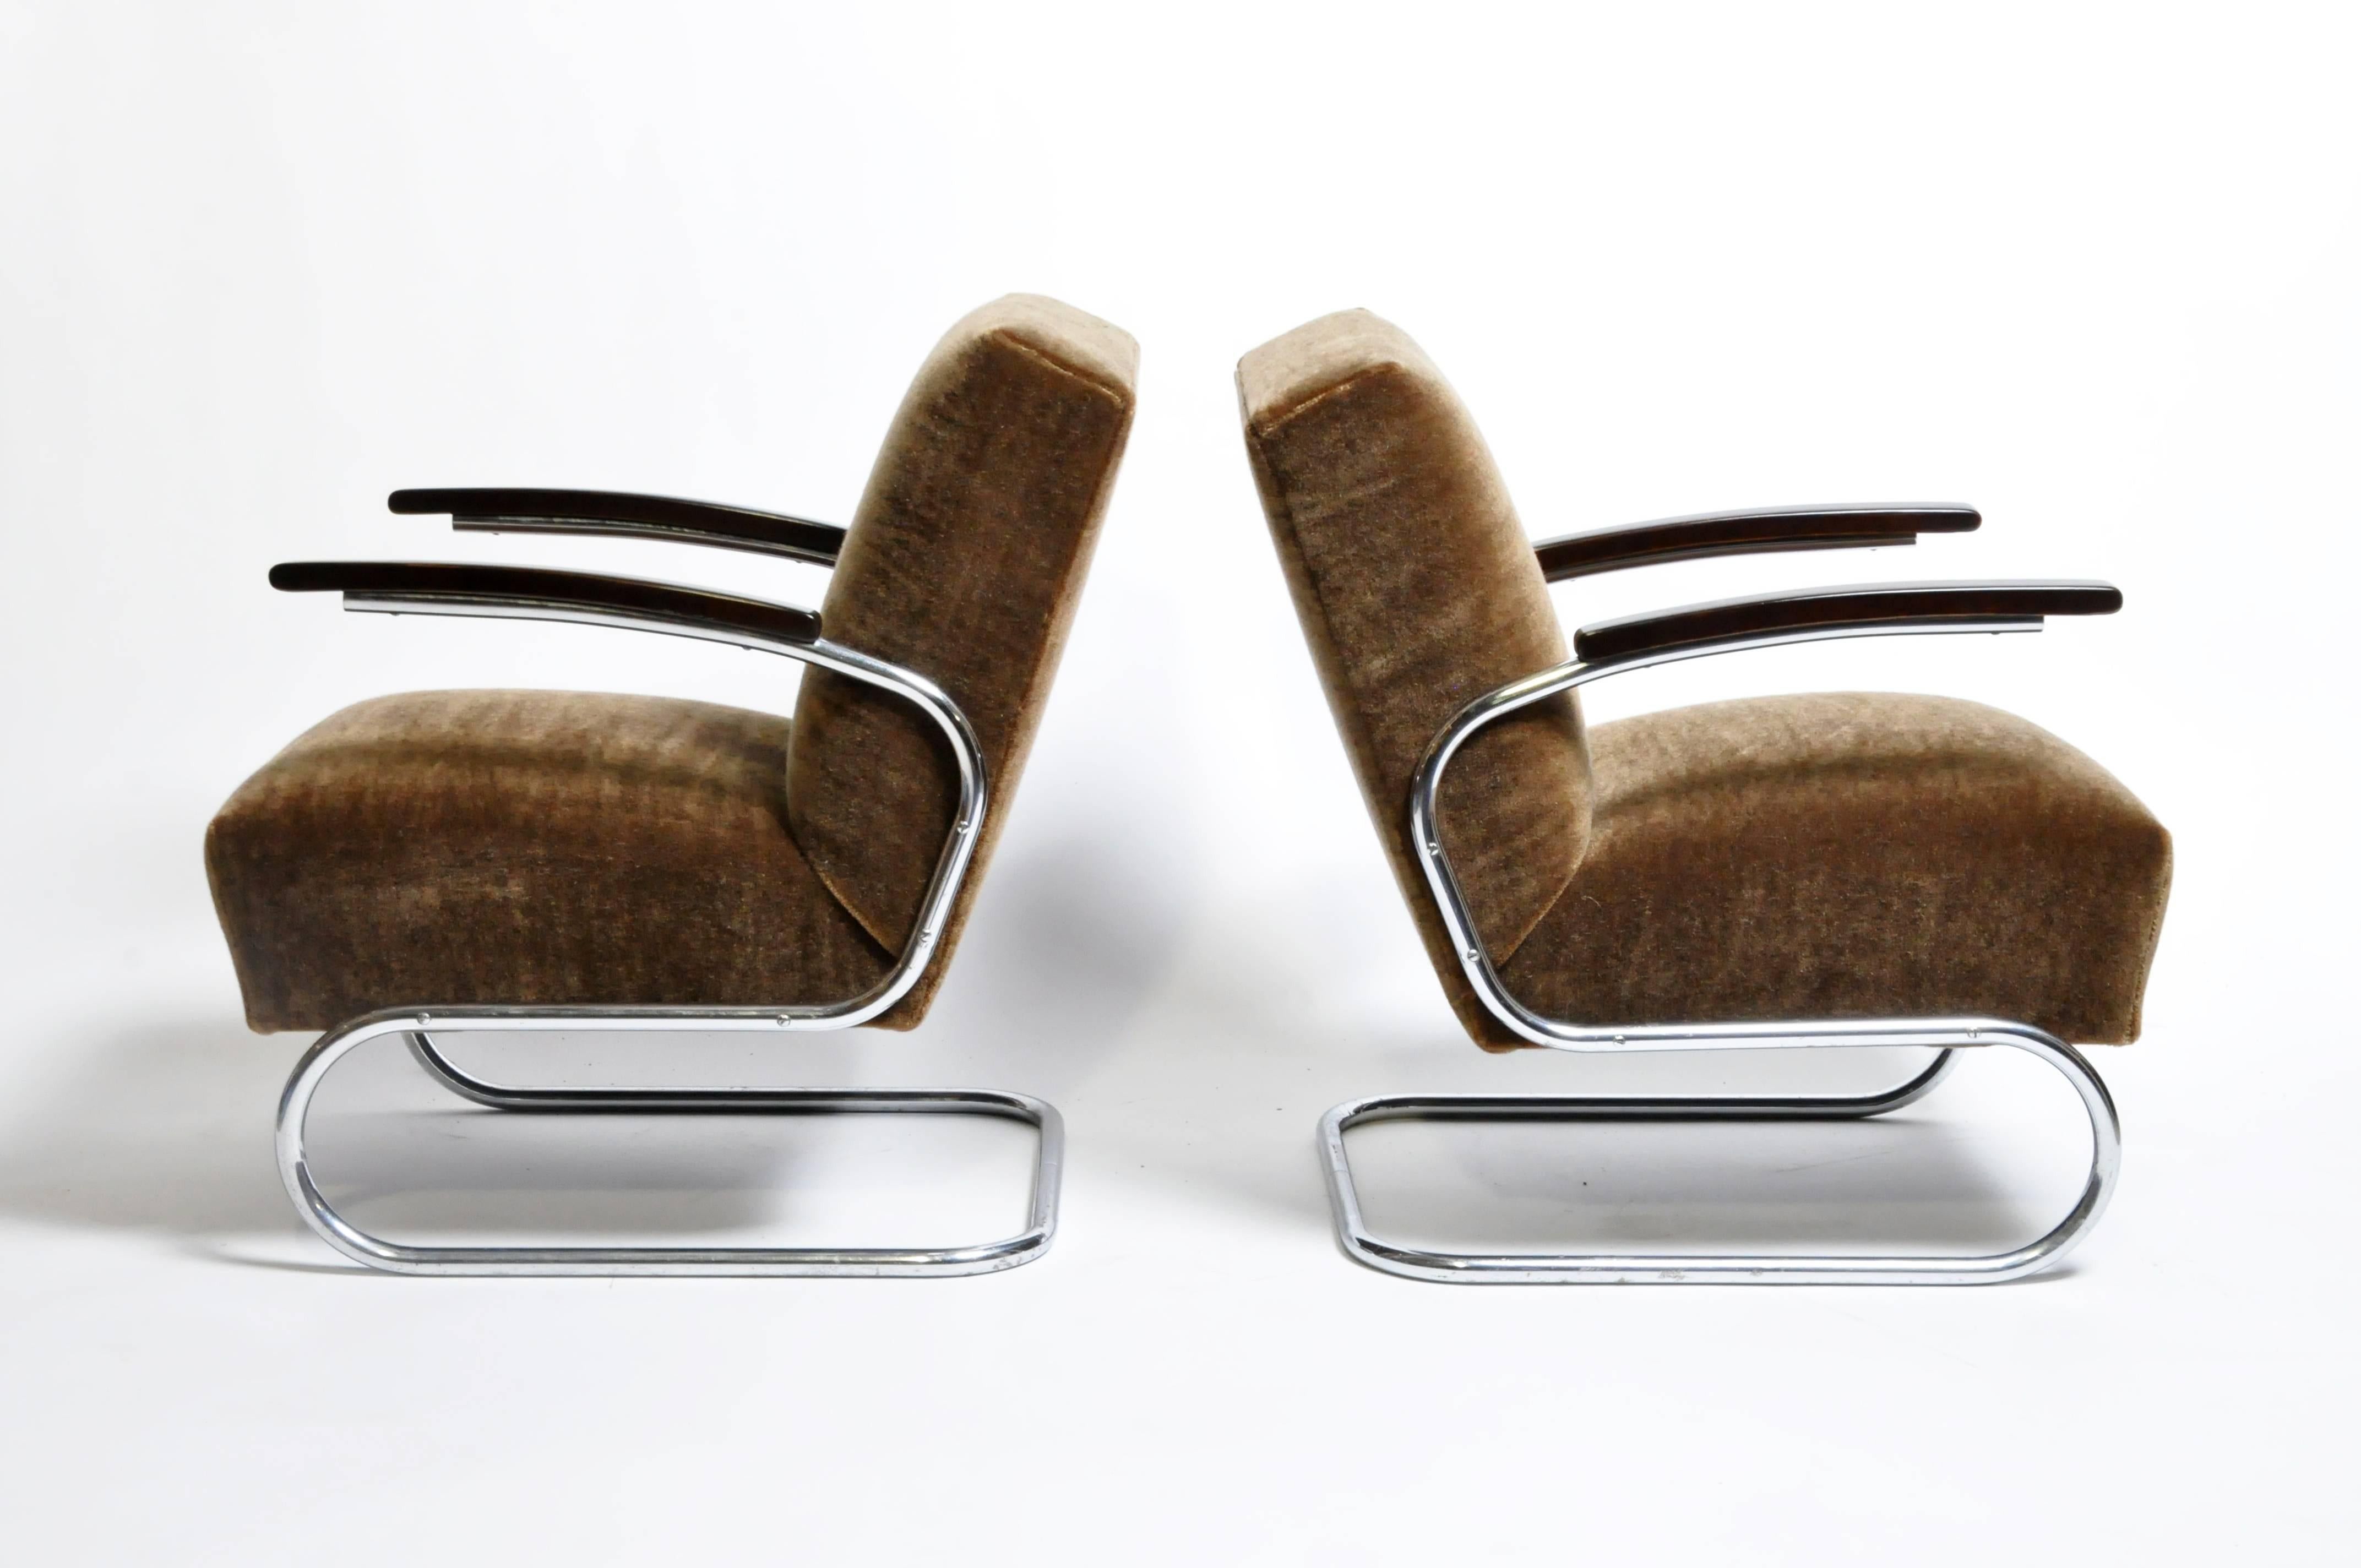 Hungarian Pair of Chairs with Curved Chrome Legs